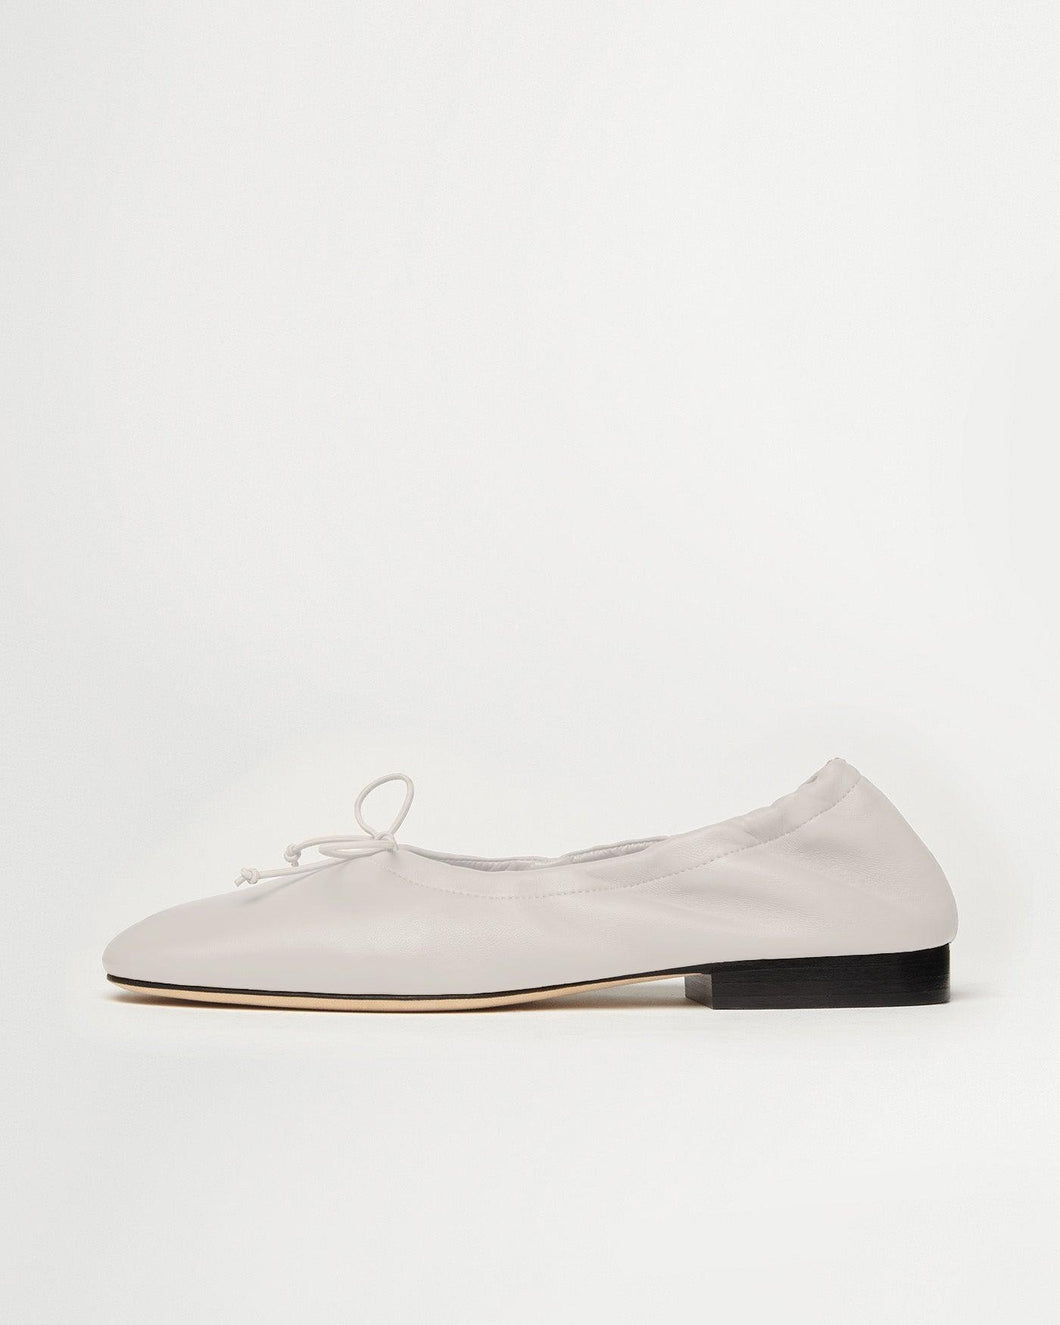 Side view of Yuni Buffa Pia Ballerina shoe in Cloud white color made in Italy with Italian Lamb Nappa leather